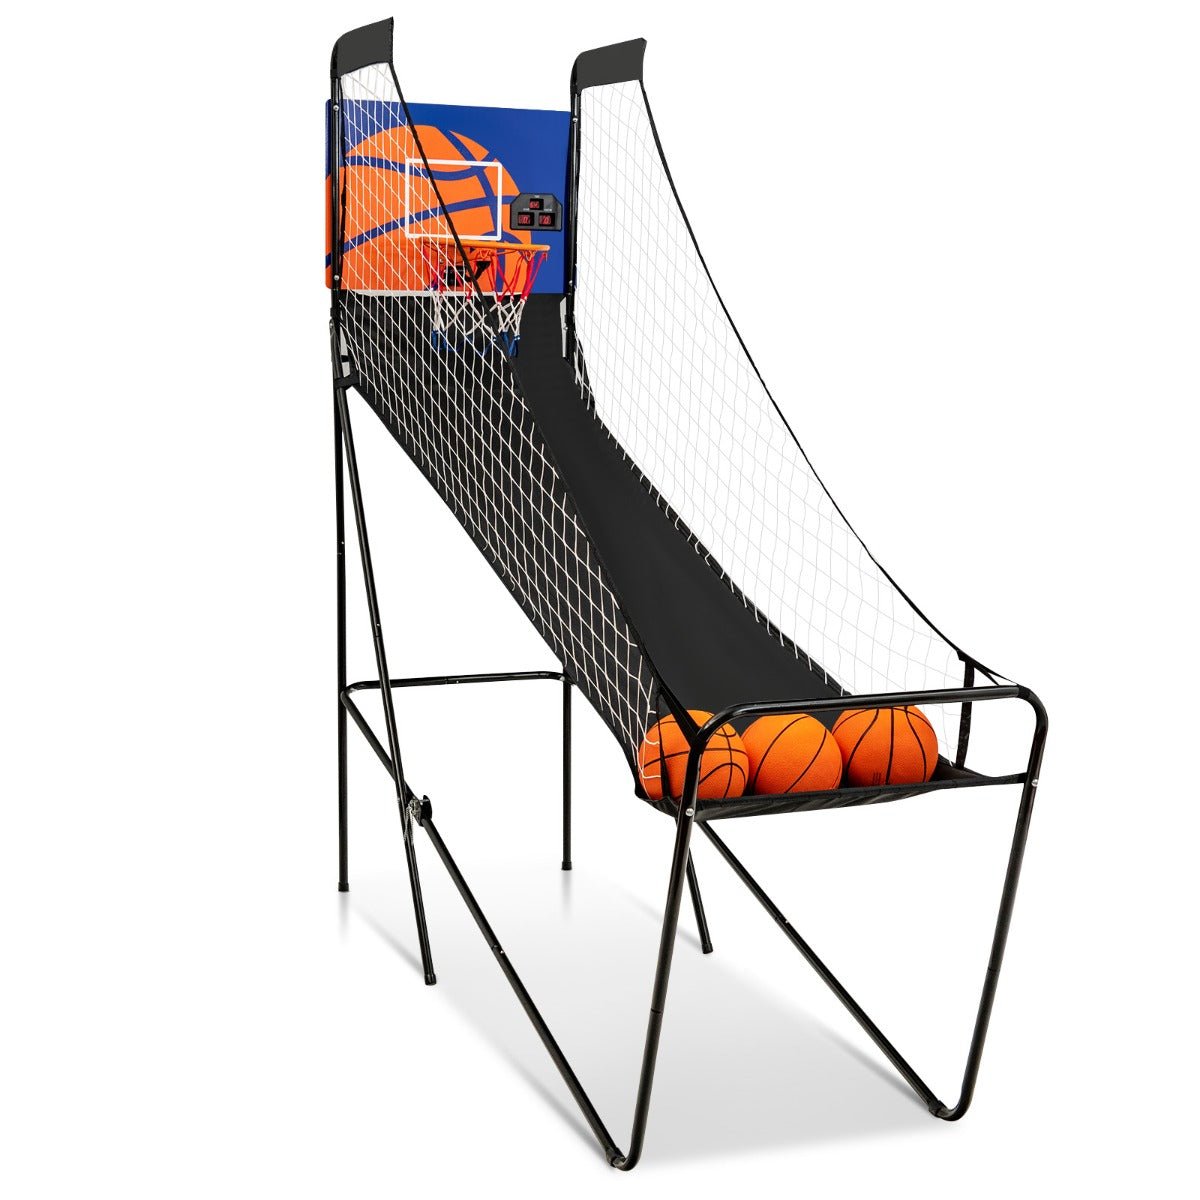 Enjoy Indoor Play with Portable Arcade Basketball Game and Electronic Scorer